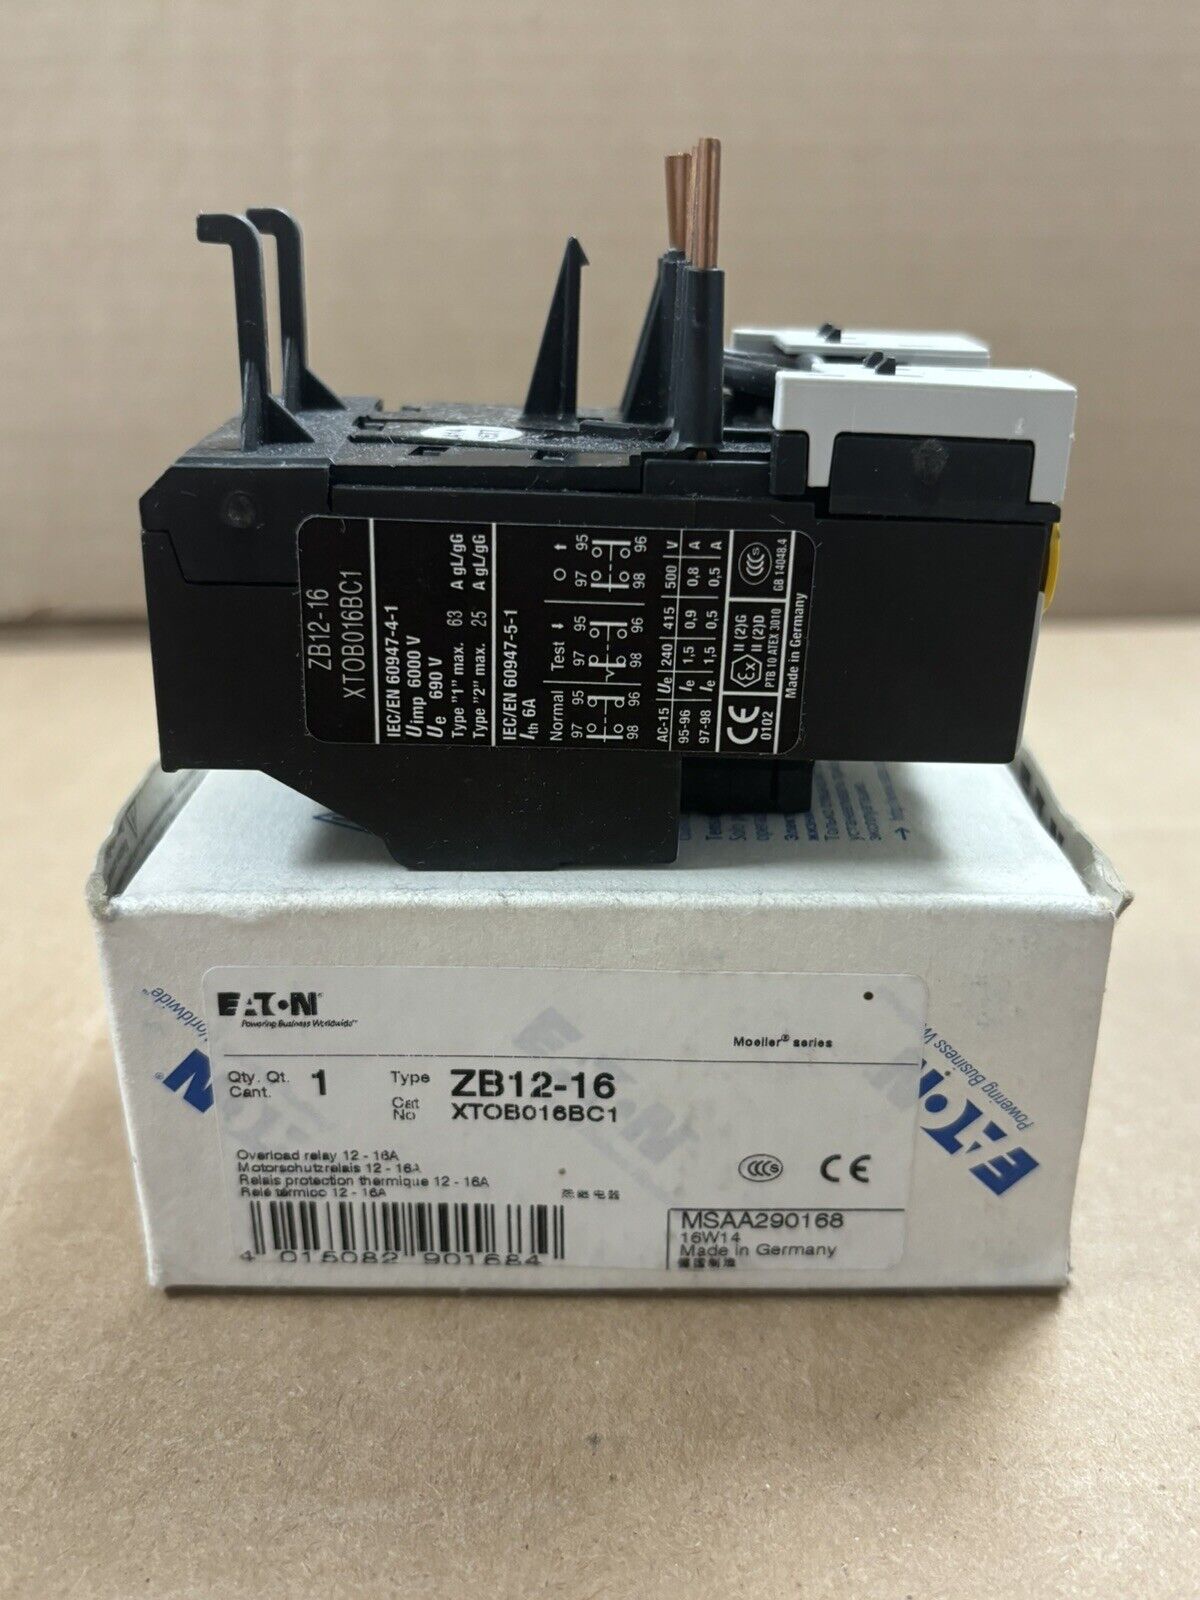 XTOB016BC1 Overload Relay, 12-16A, Thermal Overload  ZB32-16 Eaton ZB12-16